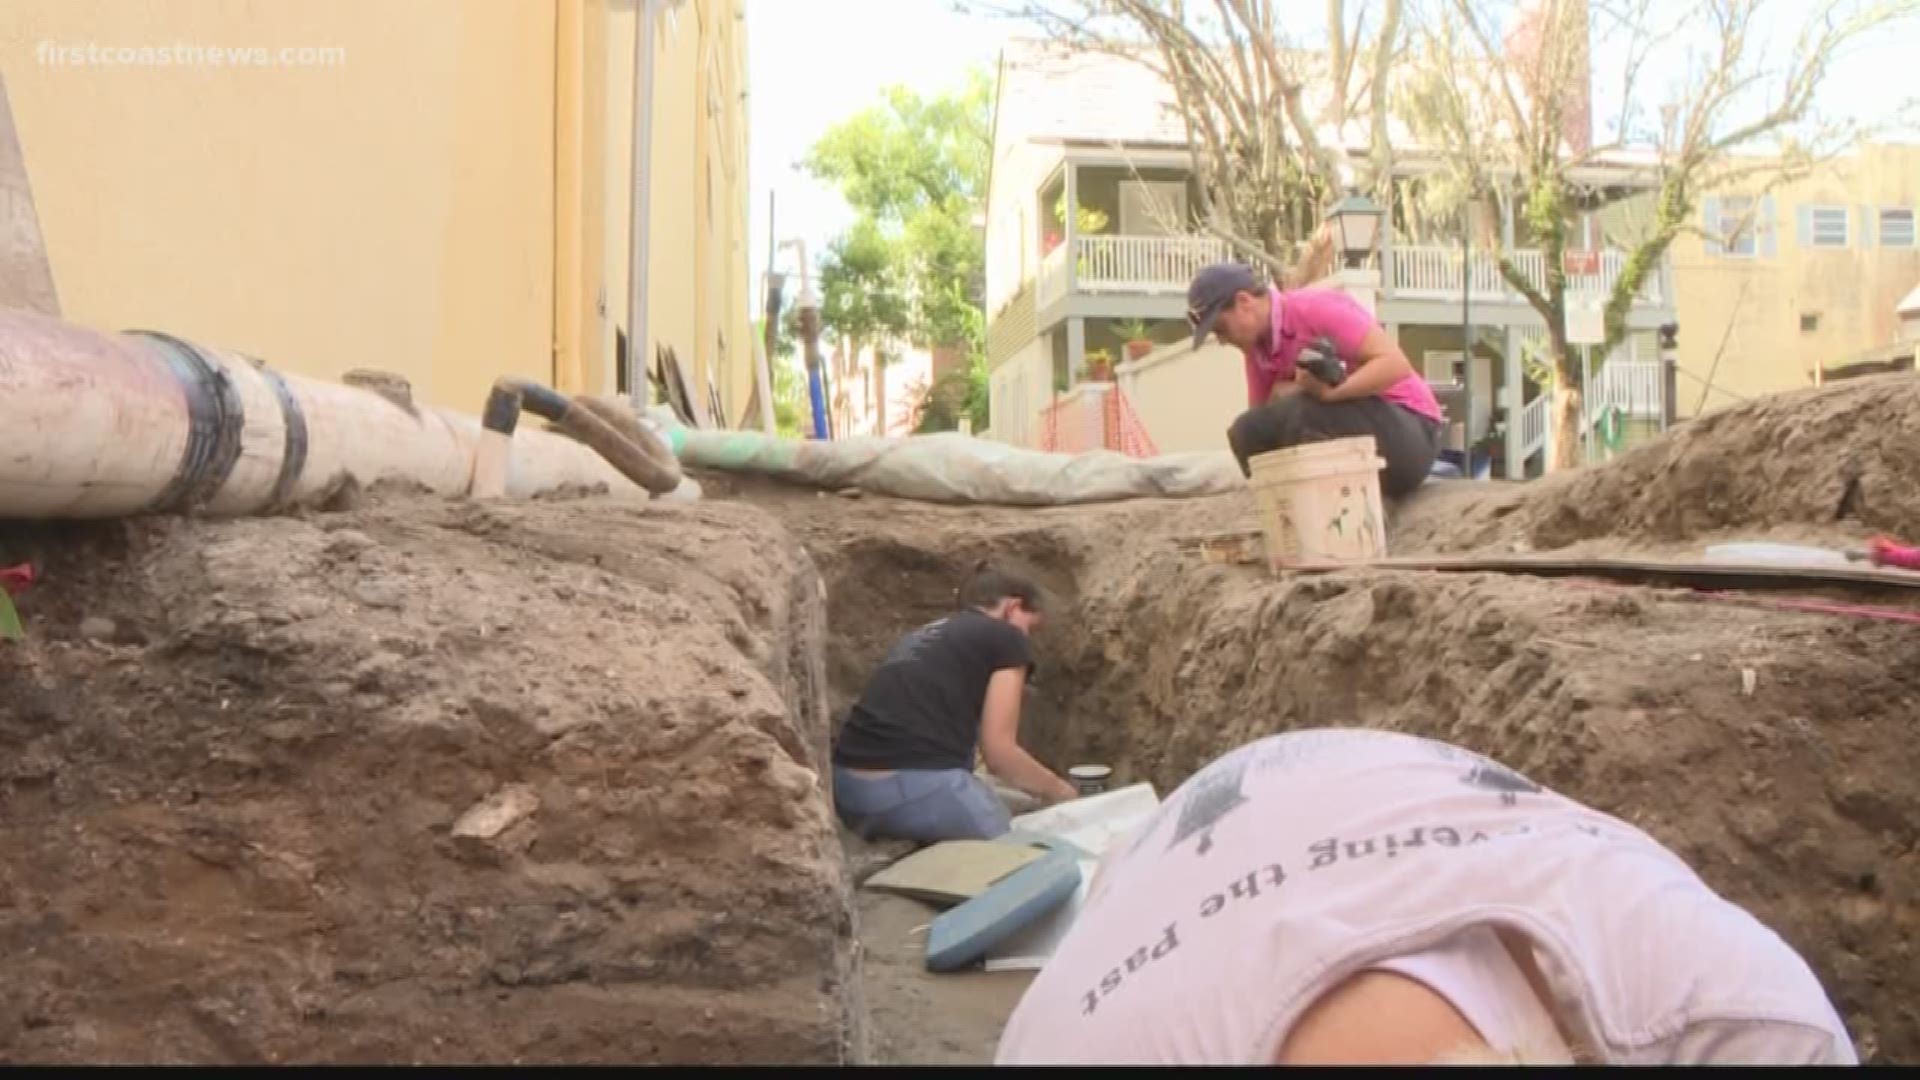 More burials of possibly the first St. Augustine colonists have been discovered.